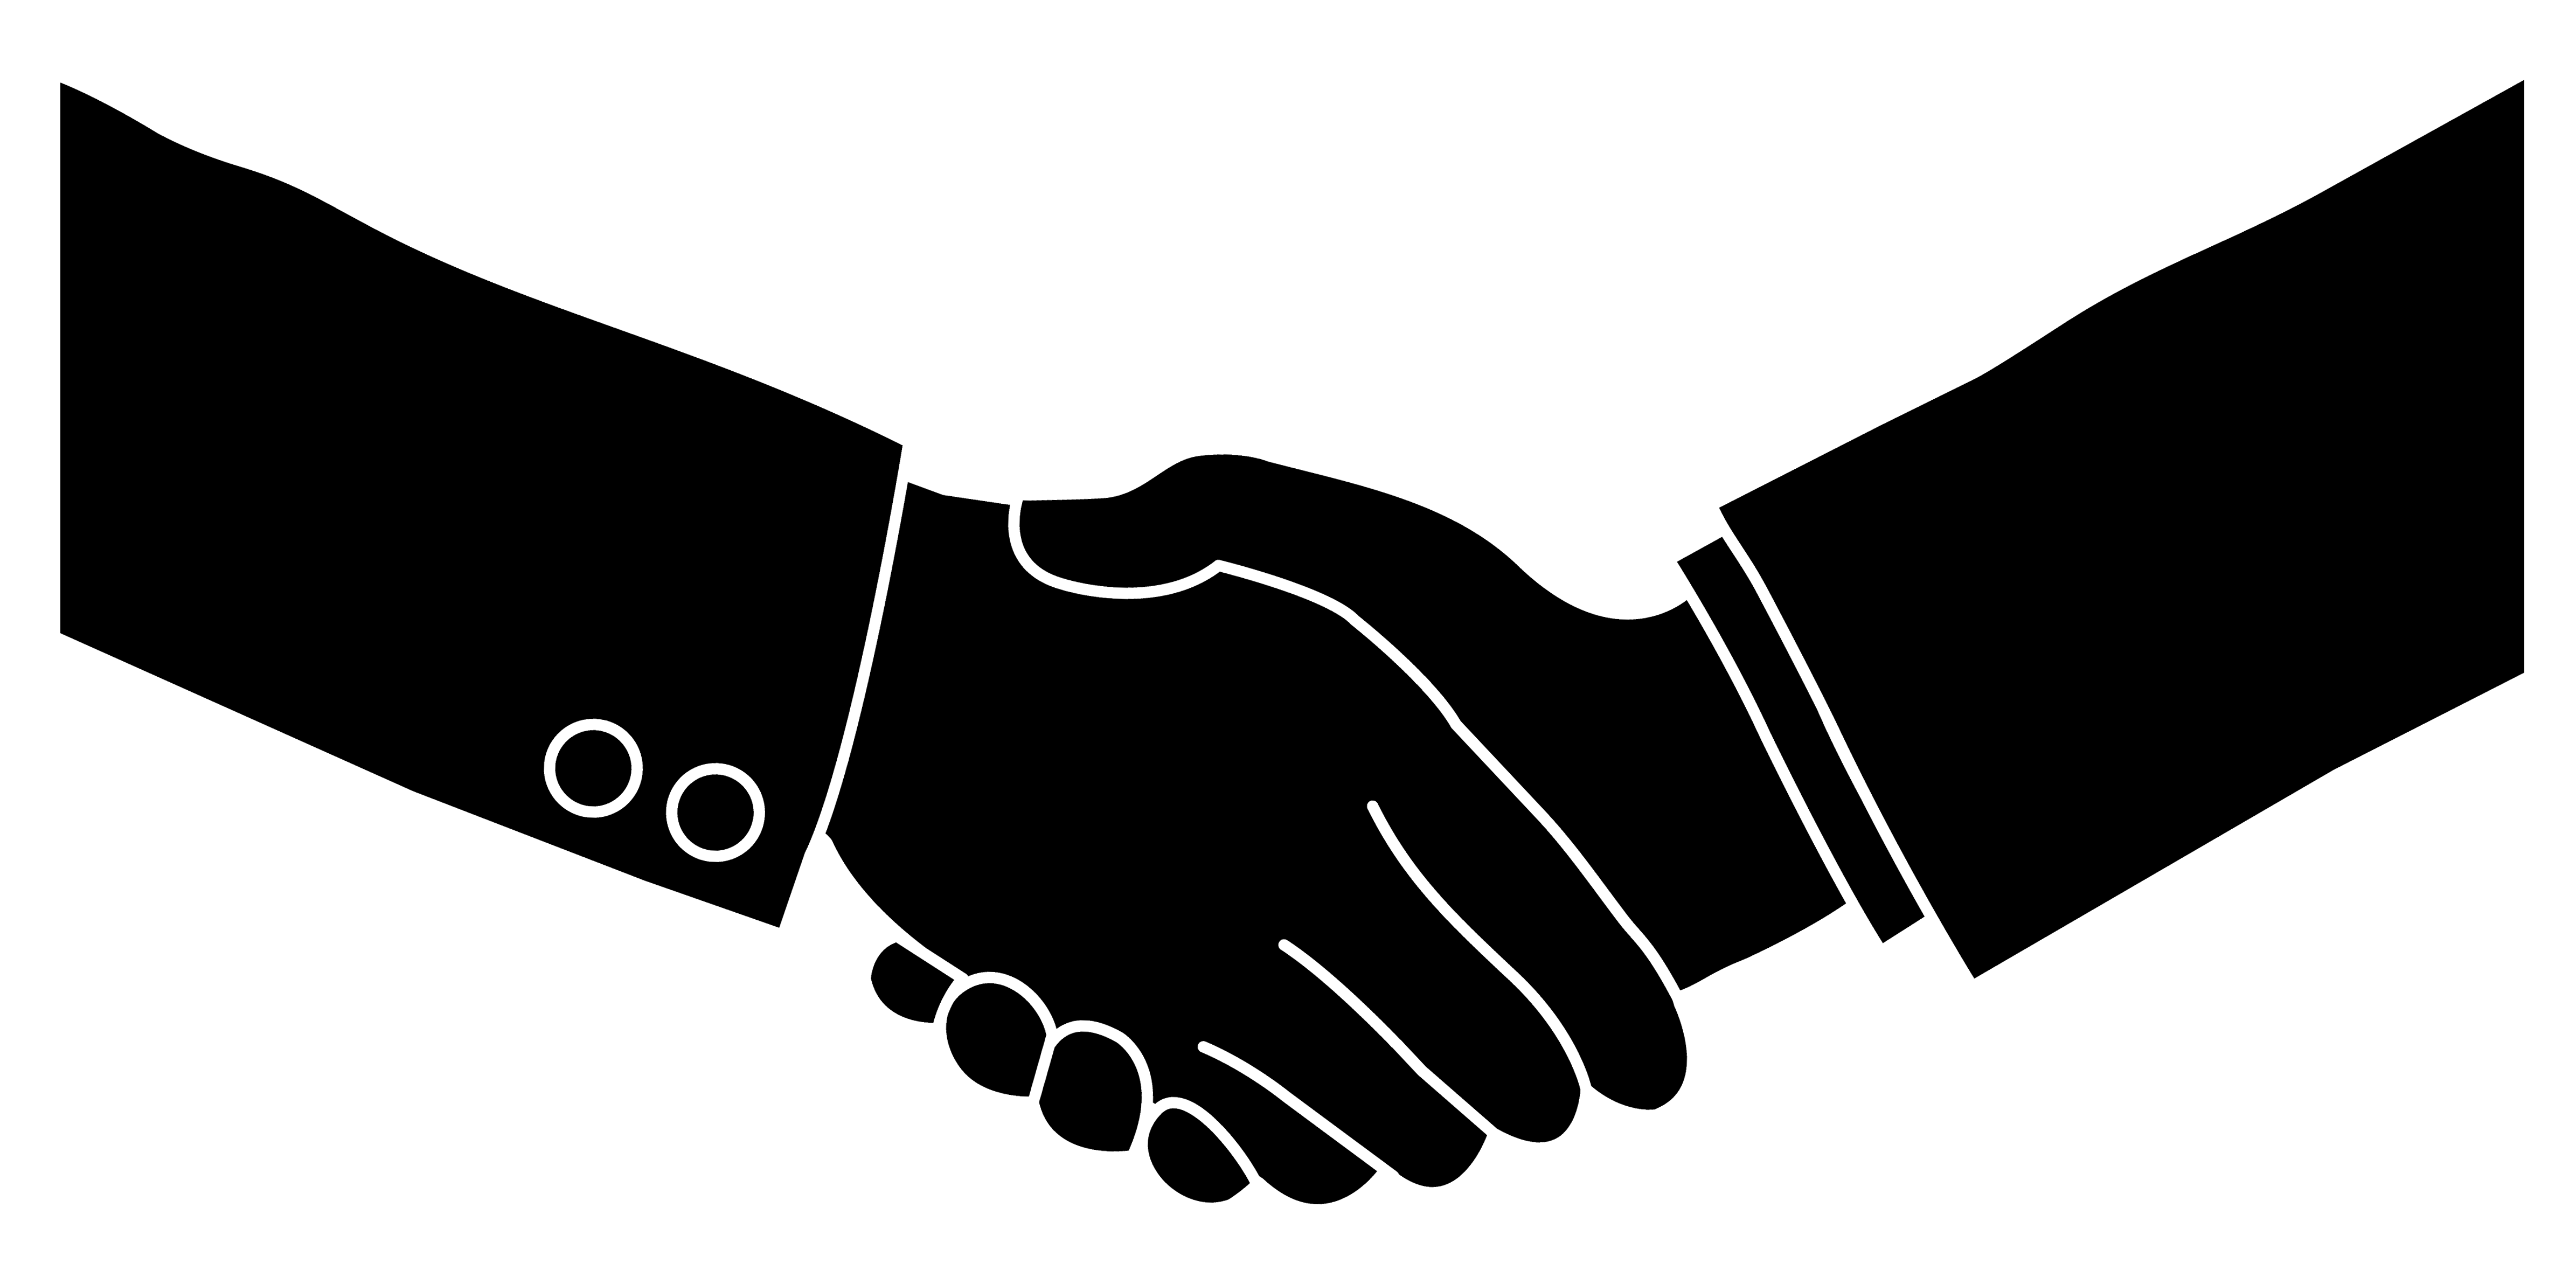 Shaking hands clip art | Clipart library - Free Clipart Images